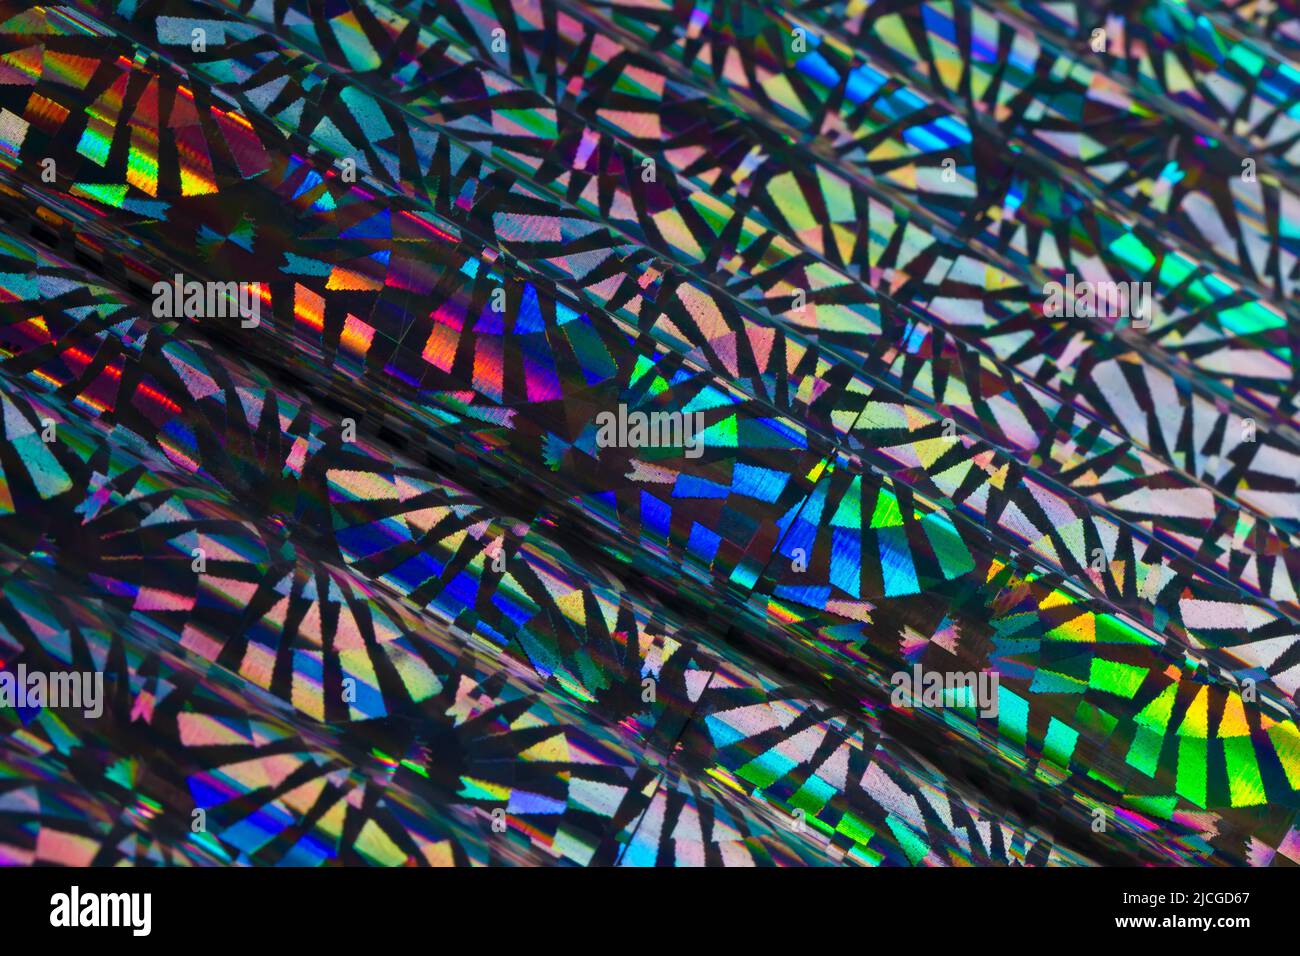 Iridescent holographic metal foil background. Stock Photo